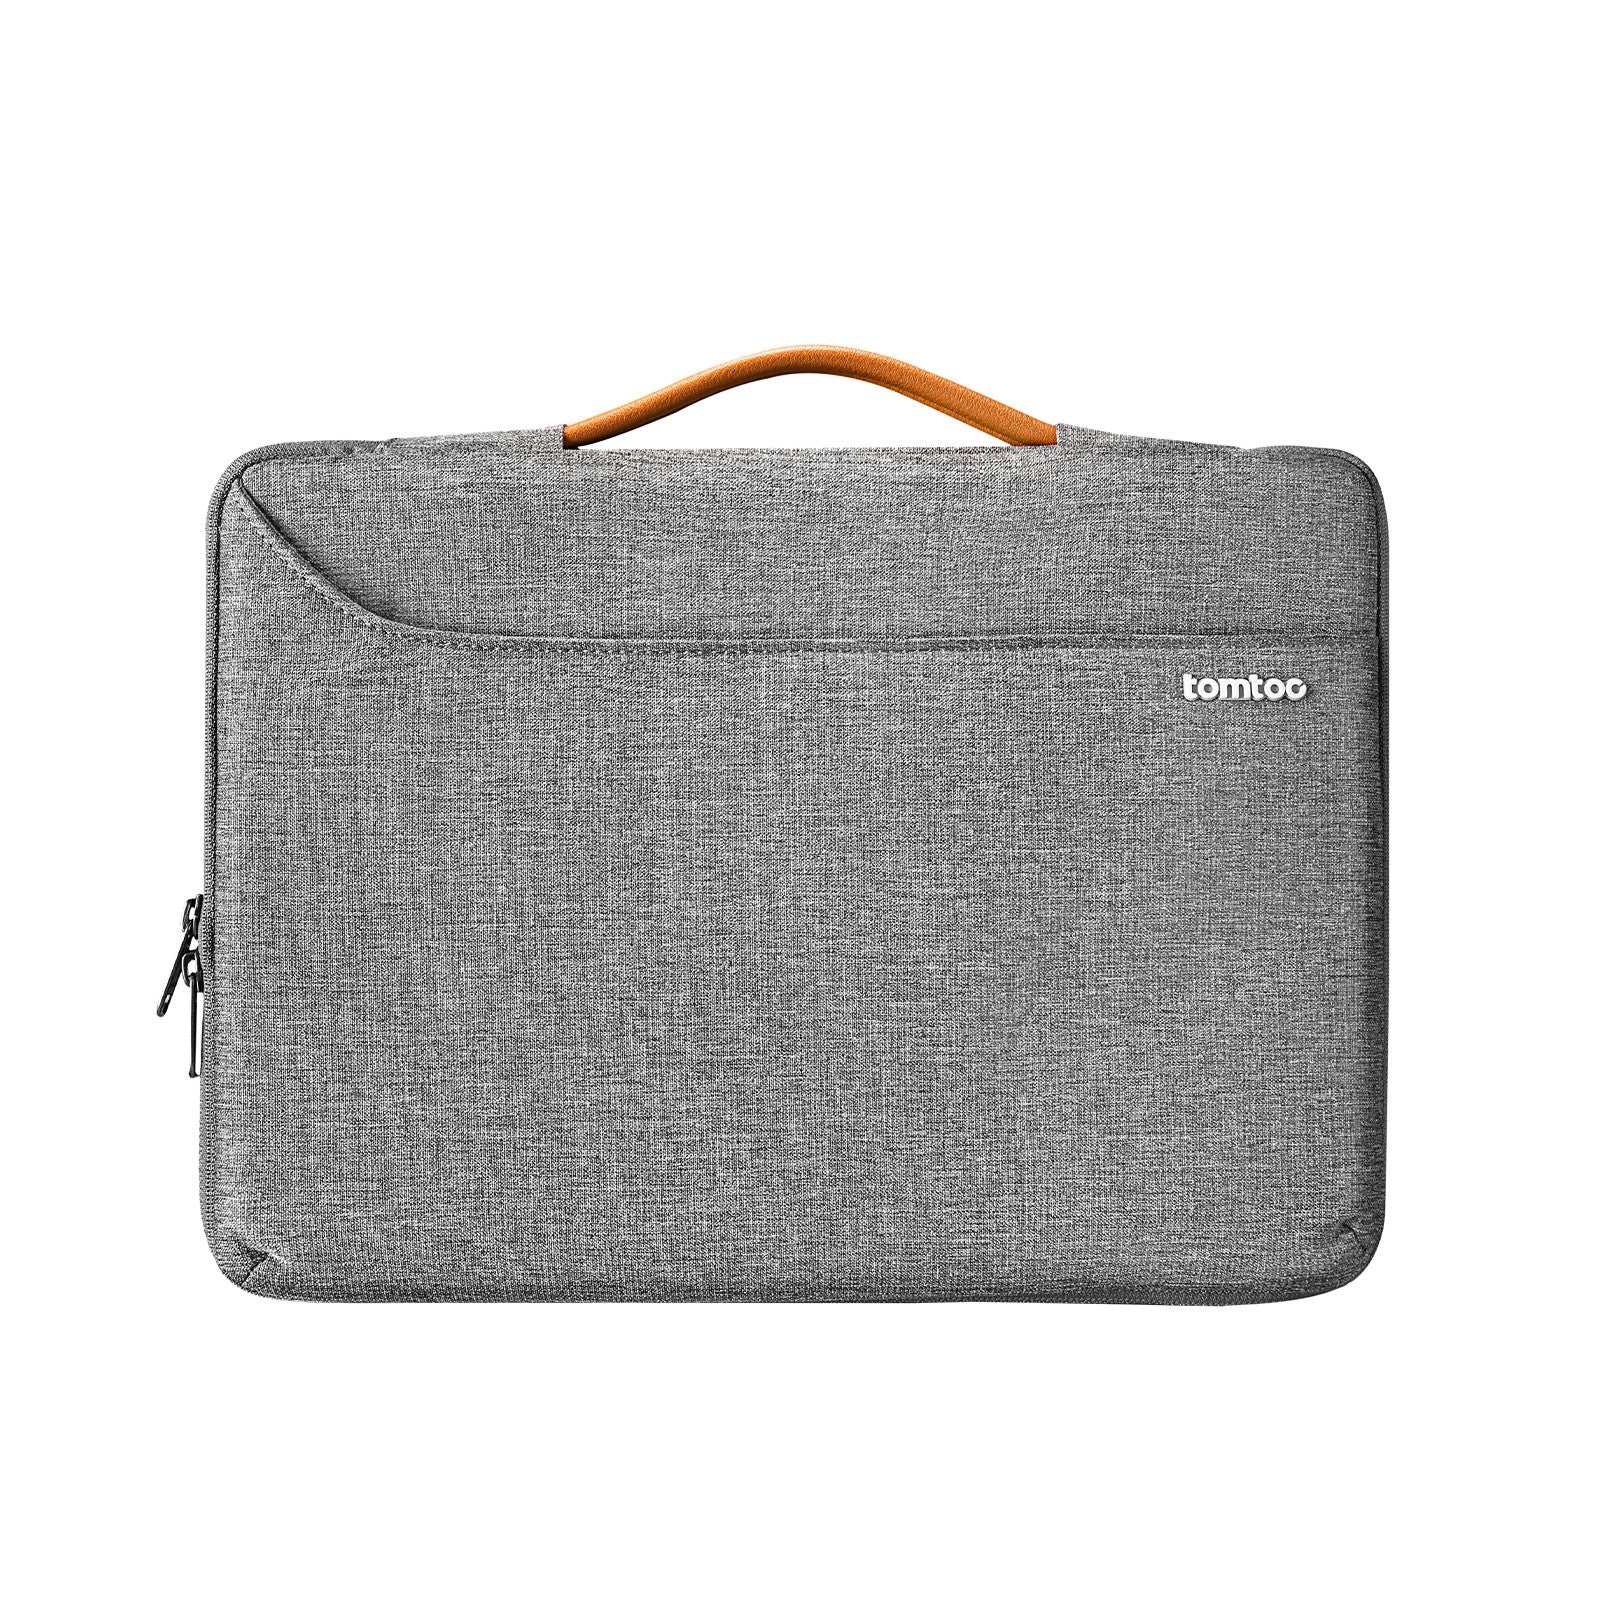 Defender-A22 Laptop Briefcase For 15.6-inch Universal Laptop | Gray